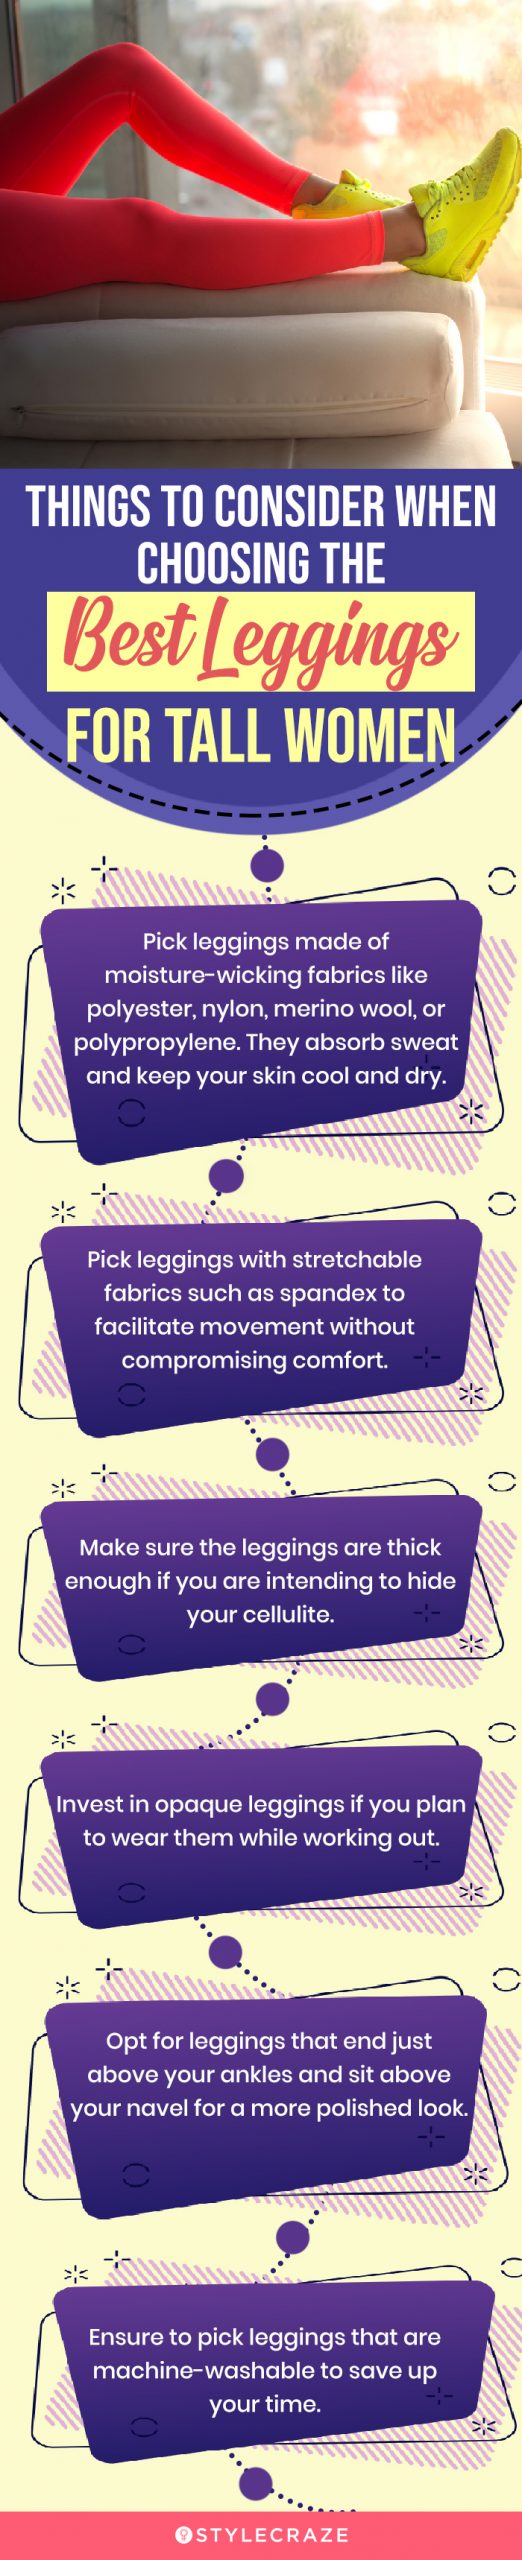 Things To Consider When Choosing The Best Leggings For Tall Women (infographic)